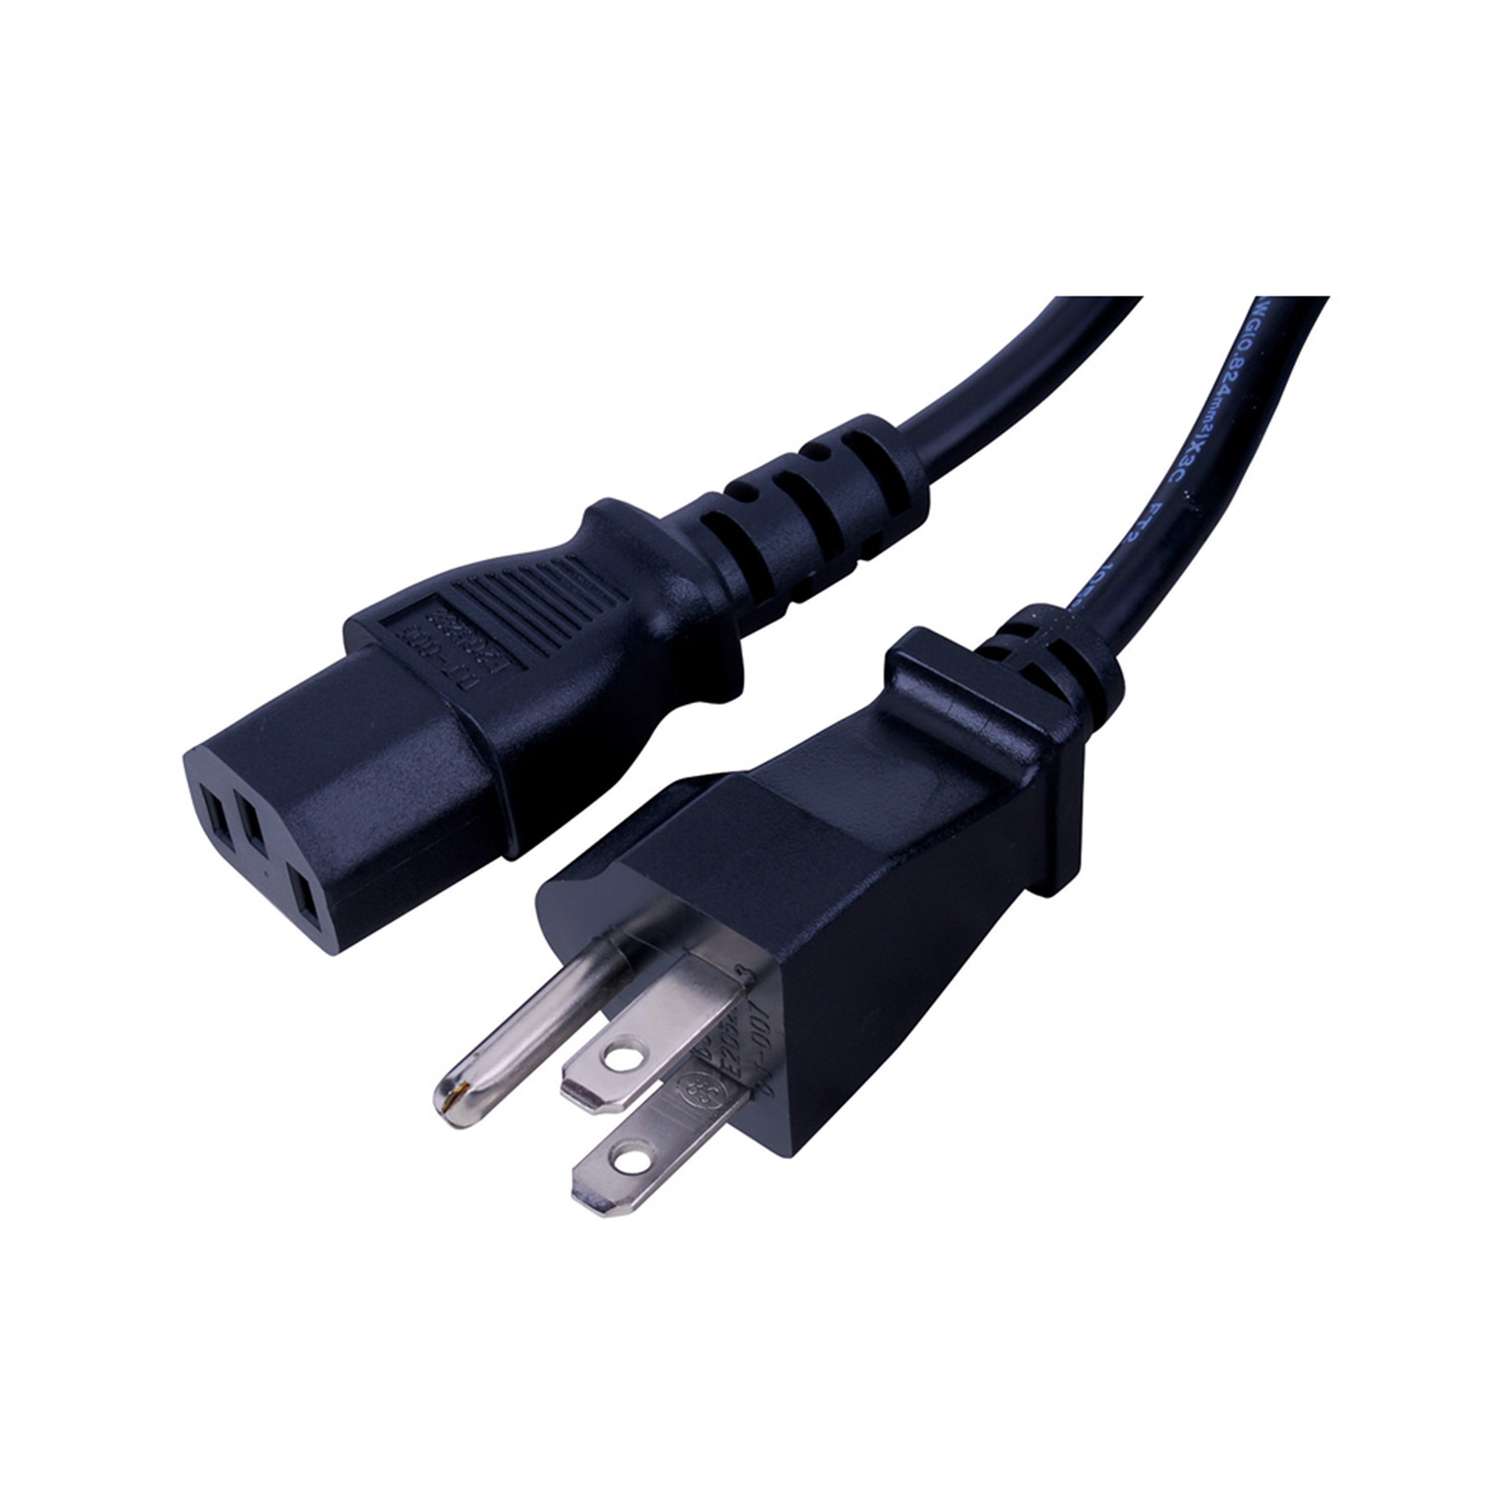 6Ft Cord 2 Prong Power Cable 2 Slot Wall Cable Replacement Printer Power Cable 18 AWG AIR SIX UL Listed 